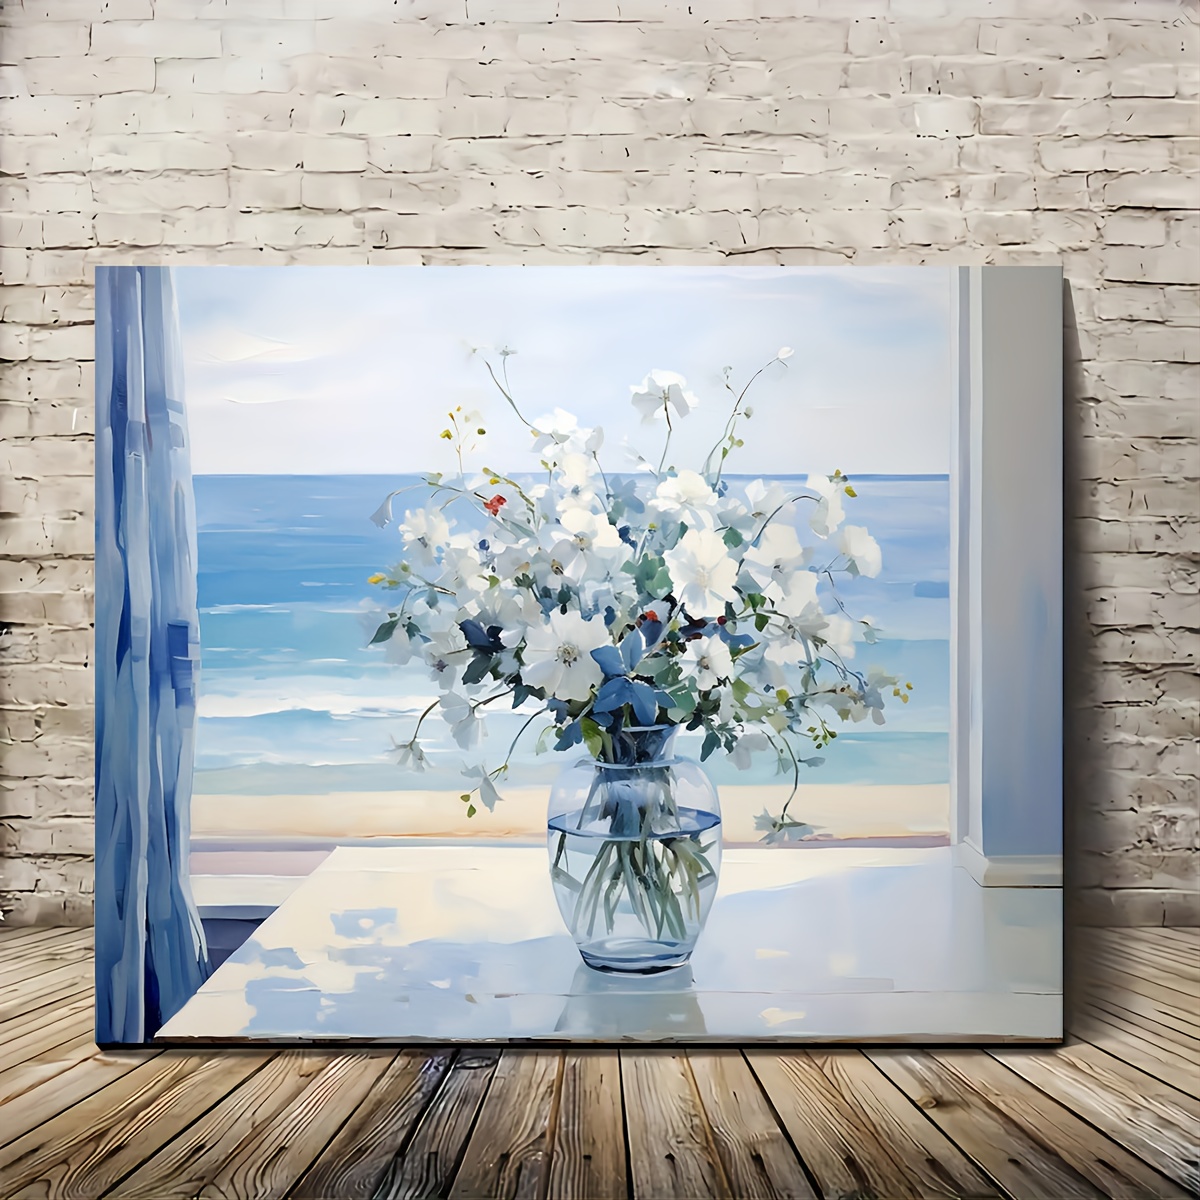 

1pc Wooden Framed Blue Sea Flowers Canvas Painting Vase With White Blooms Wall Art - Home & Living Room Decor, Festival Gift, 11.8inch*15.7inch - Bachelor Party Major Material